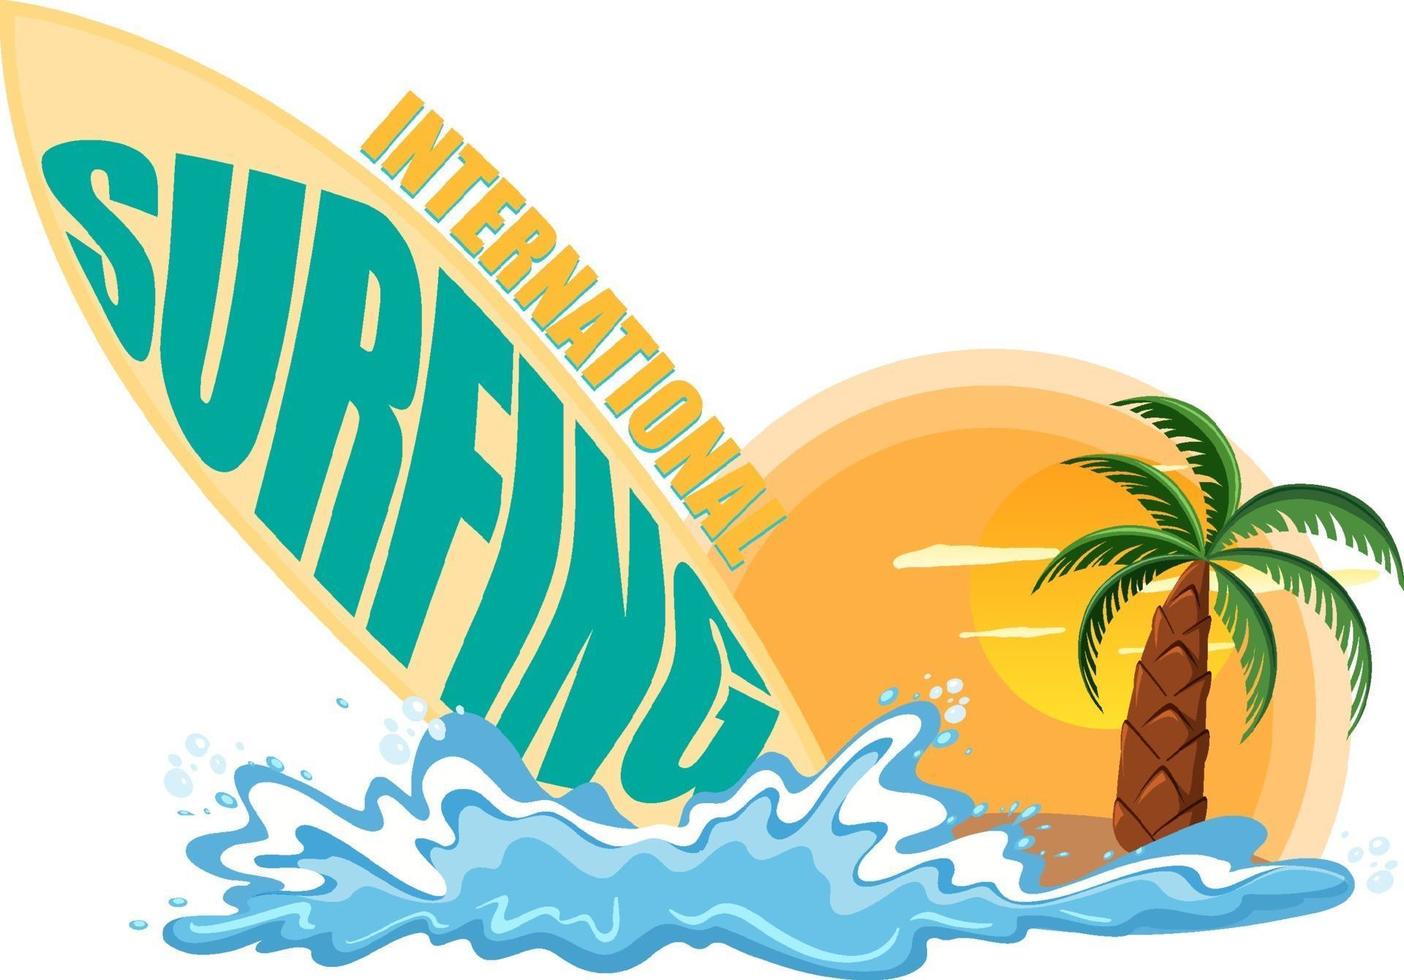 International Surfing Day banner with surfboard and beach elements vector